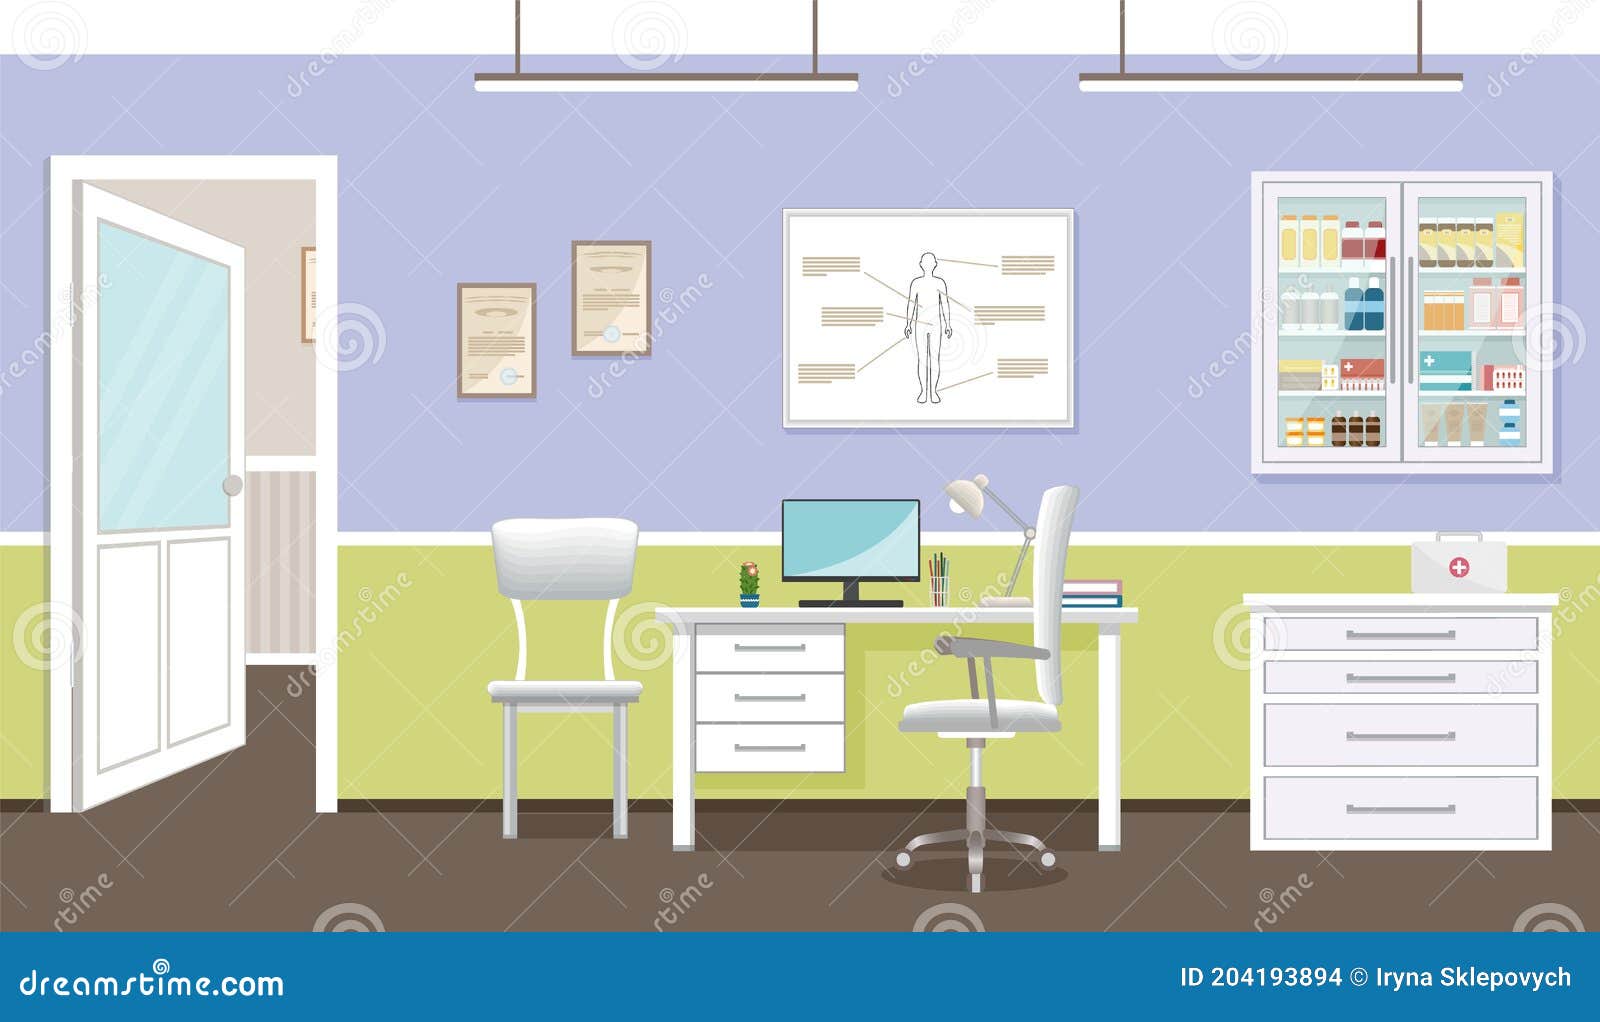 Doctors Consultation Room Interior Clinic Hospital Working Healthcare Concept Empty Medical Office Design Furniture 204193894 